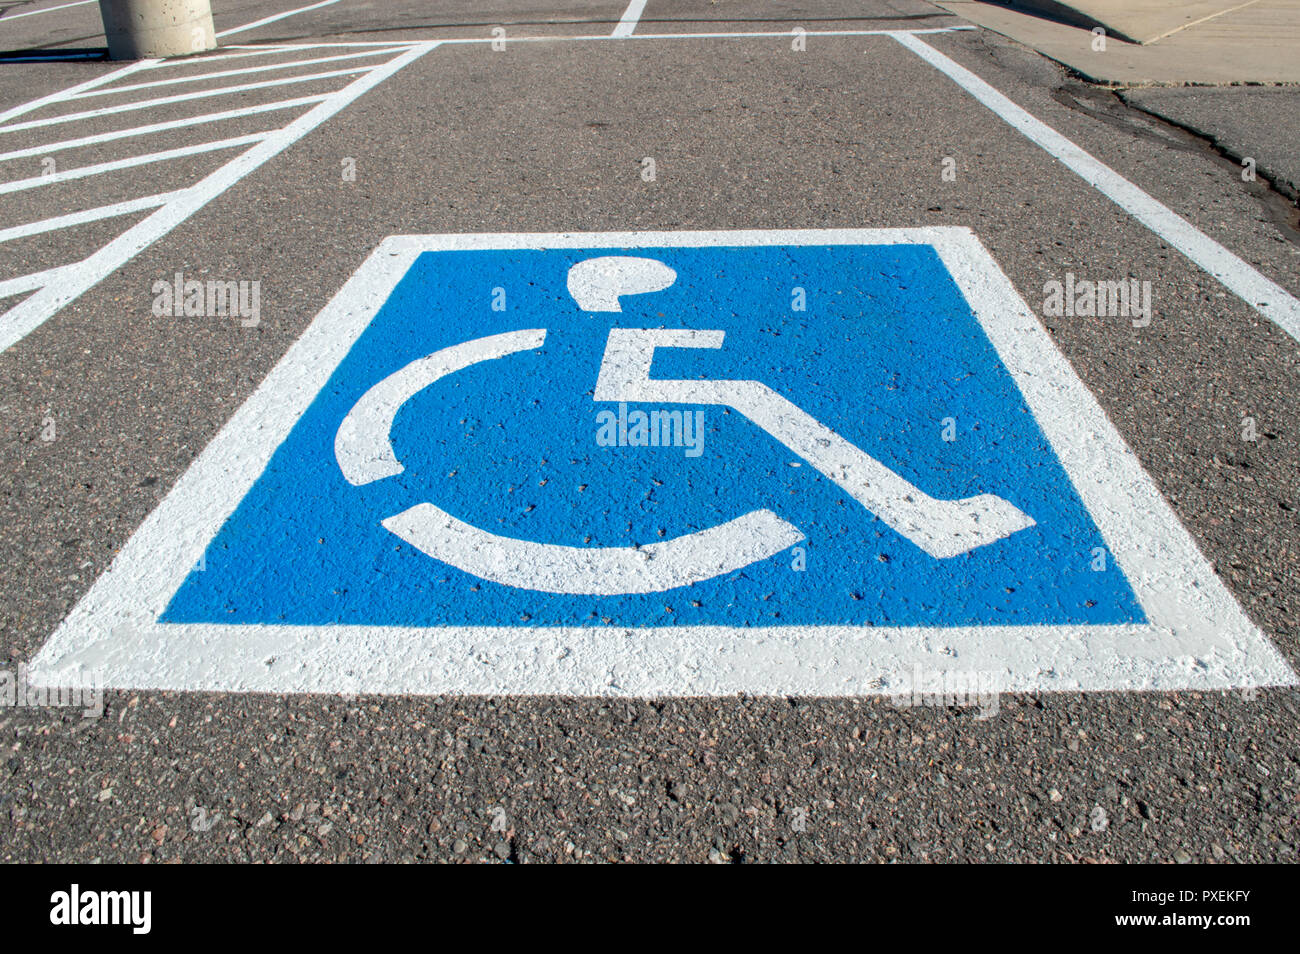 Handicapped parking spots with painted signs Stock Photo